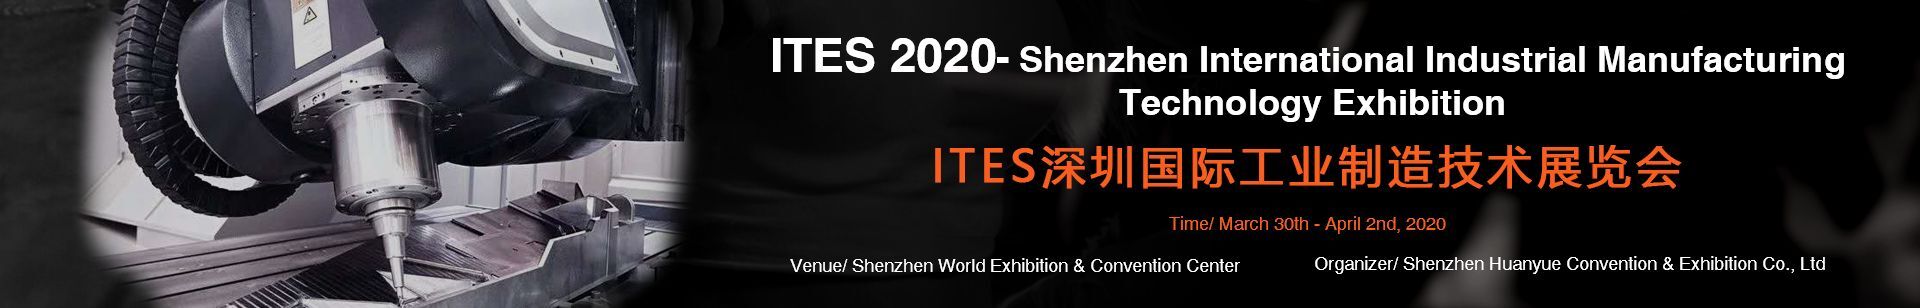 ITES 2020- SZ Int'l Industrial Manufacturing Technology Exhibition